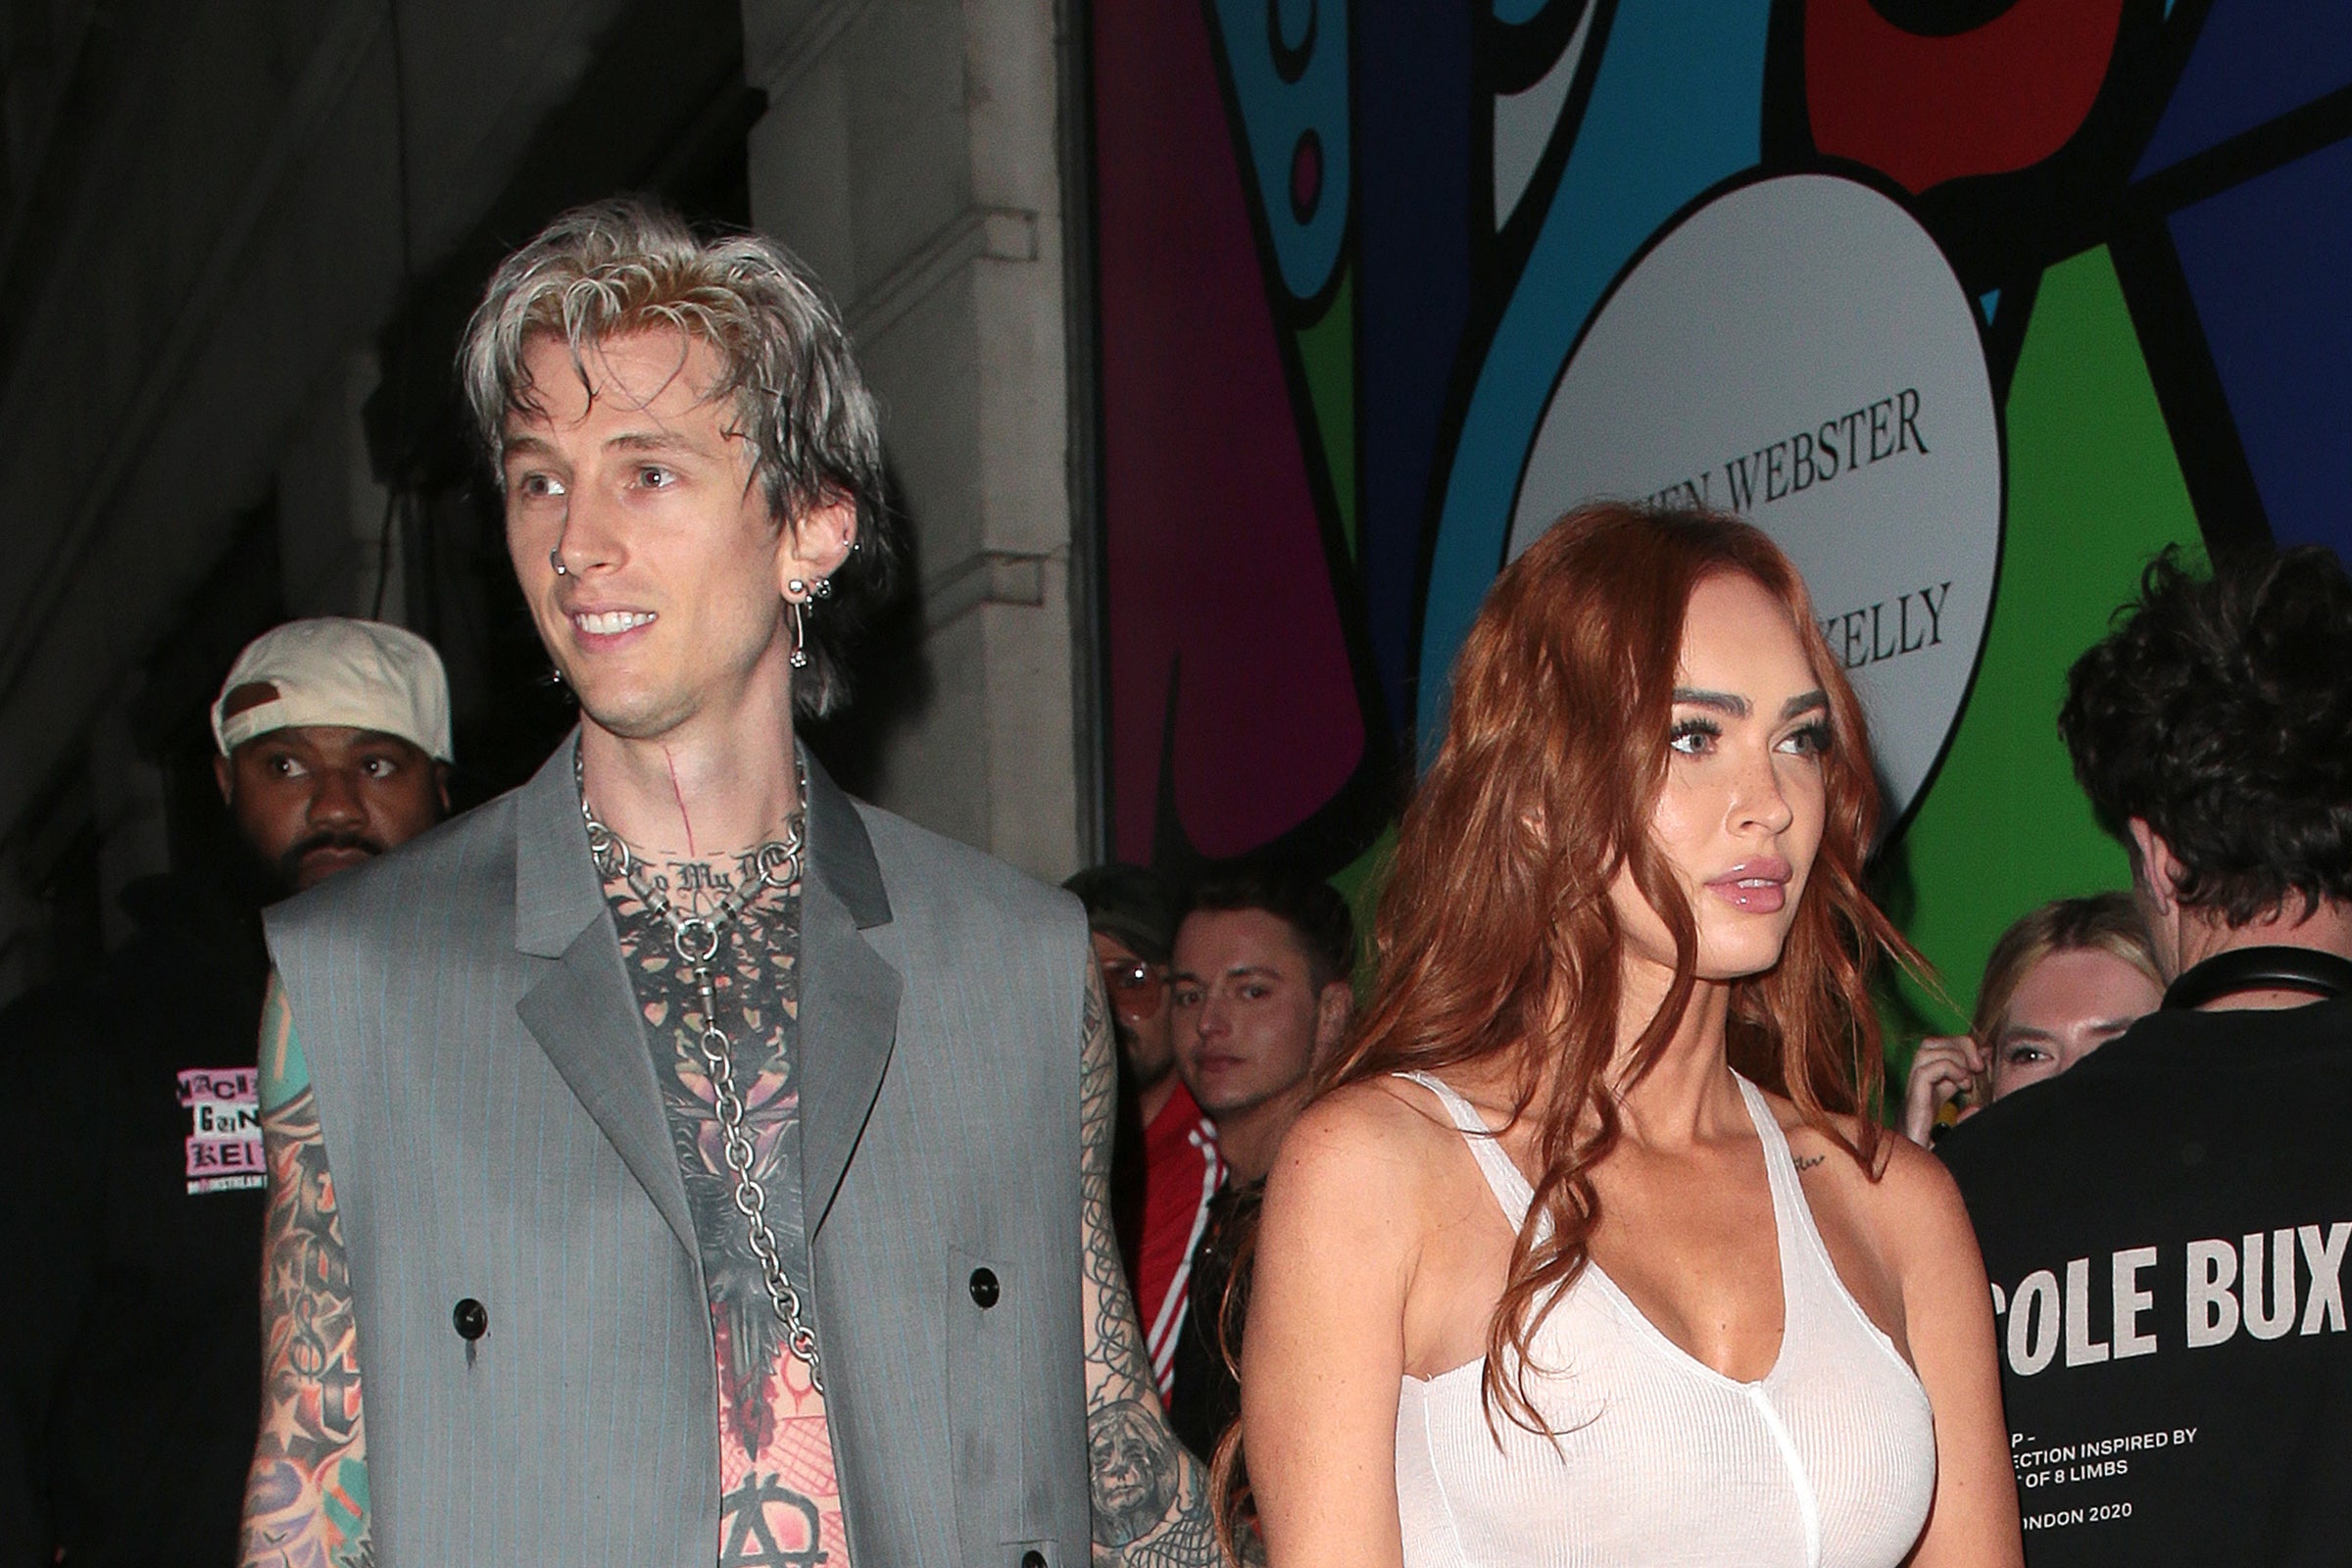 Here's Why Megan Fox And Machine Gun Kelly Are Reportedly "Taking It One Day At A Time"